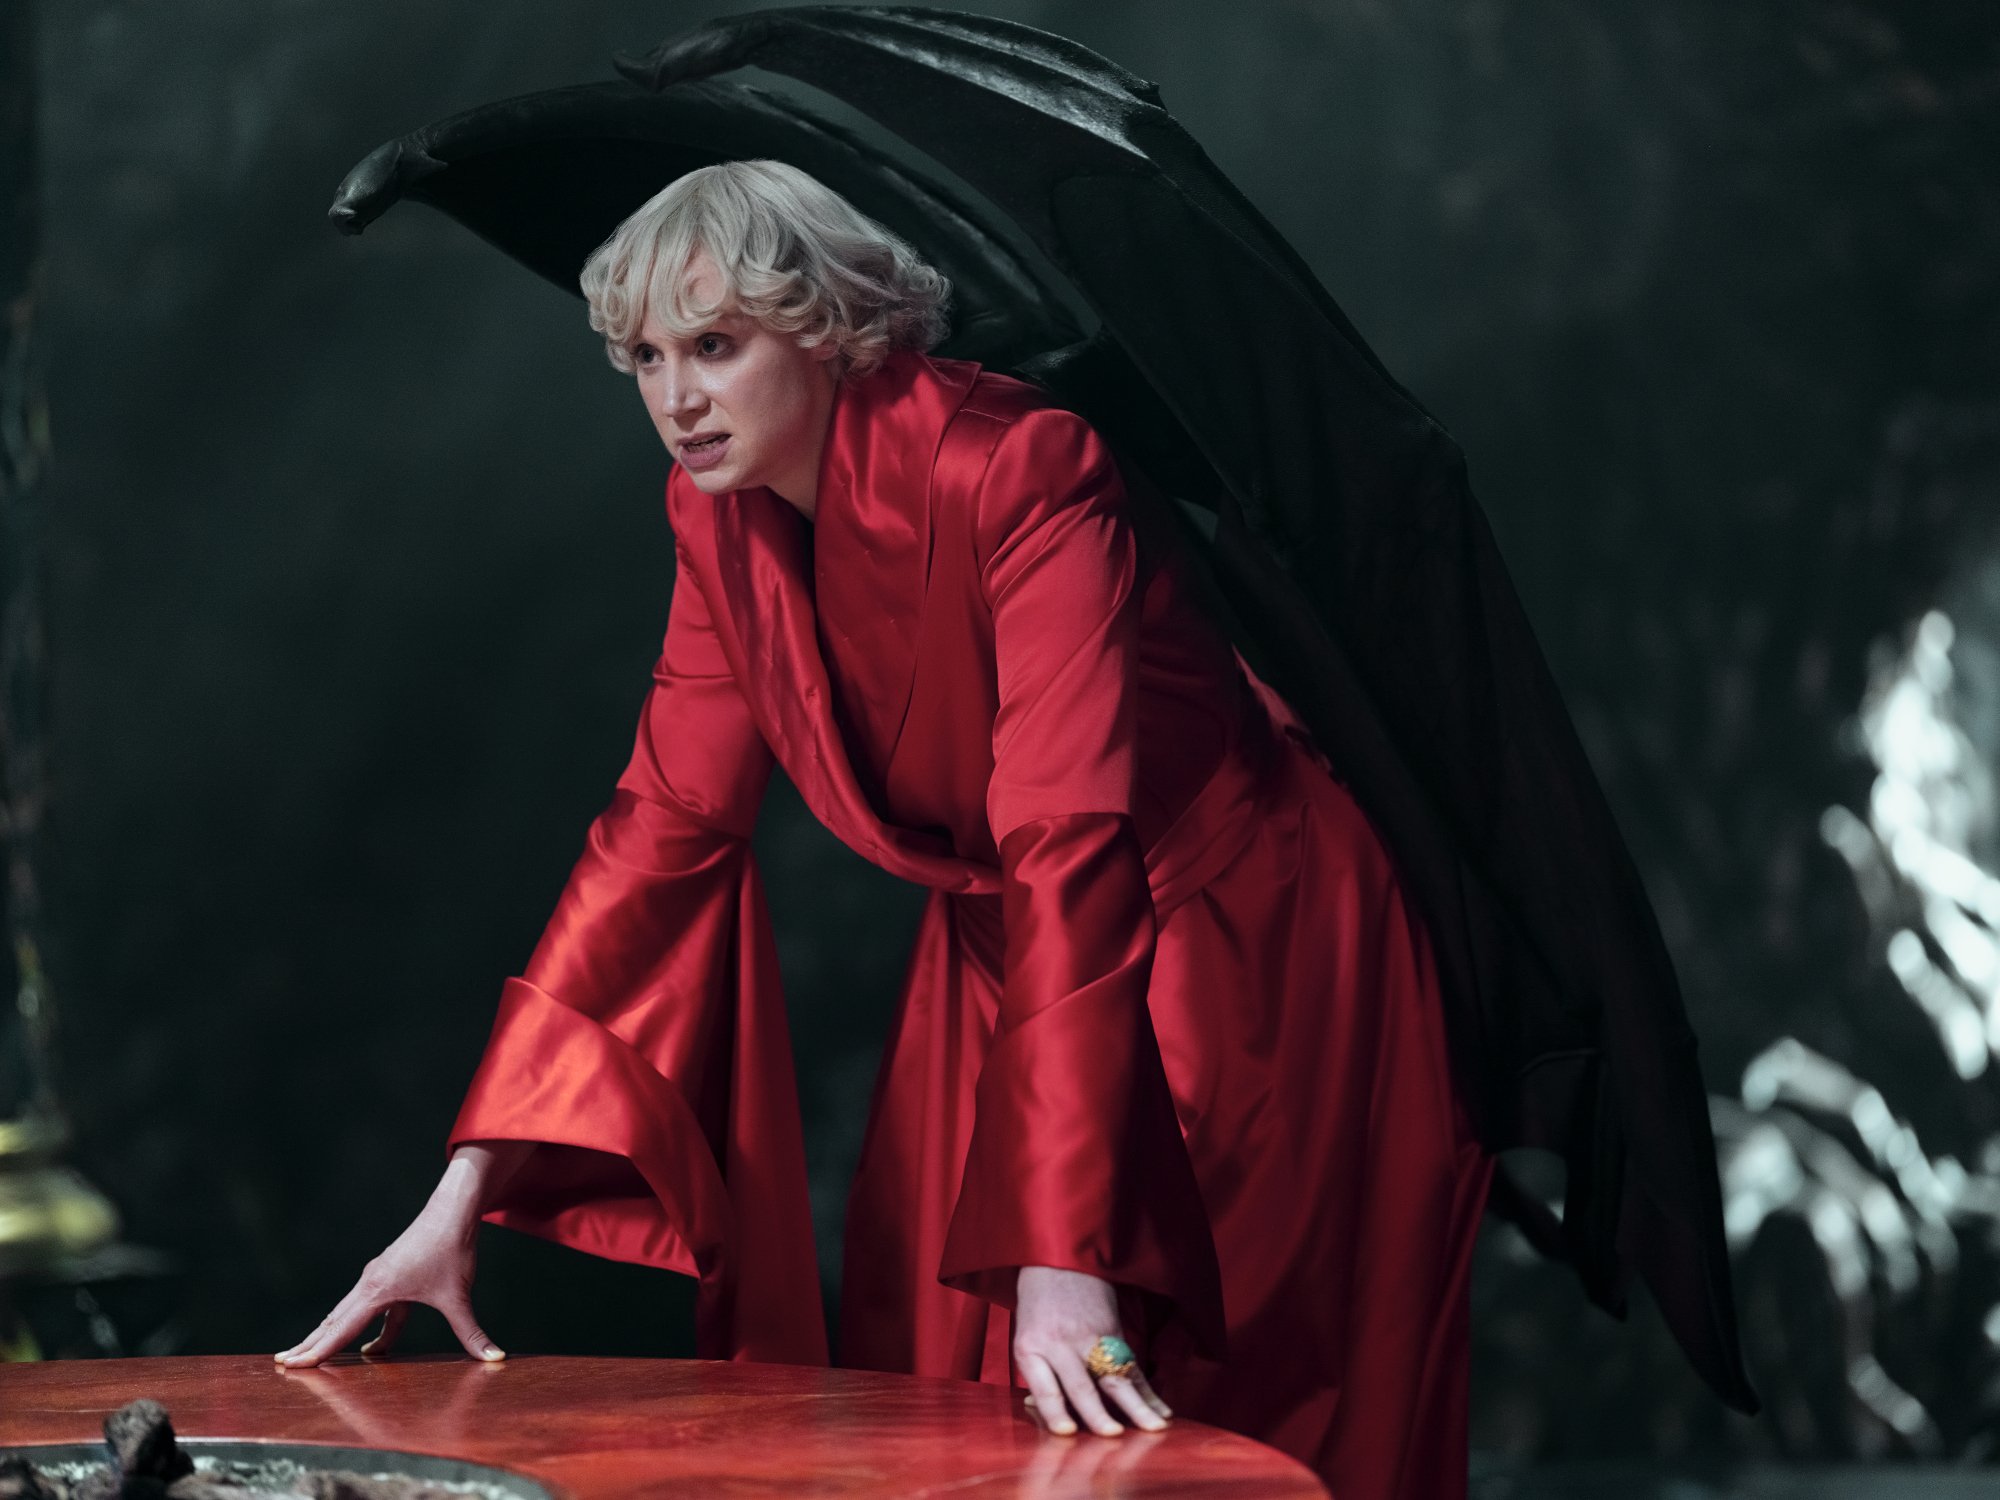 Actor Gwendoline Christie as Lucifer Morningstar in Netflix's 'The Sandman.' She's wearing all red, has black wings protruding from her back, and is leaning over a table.